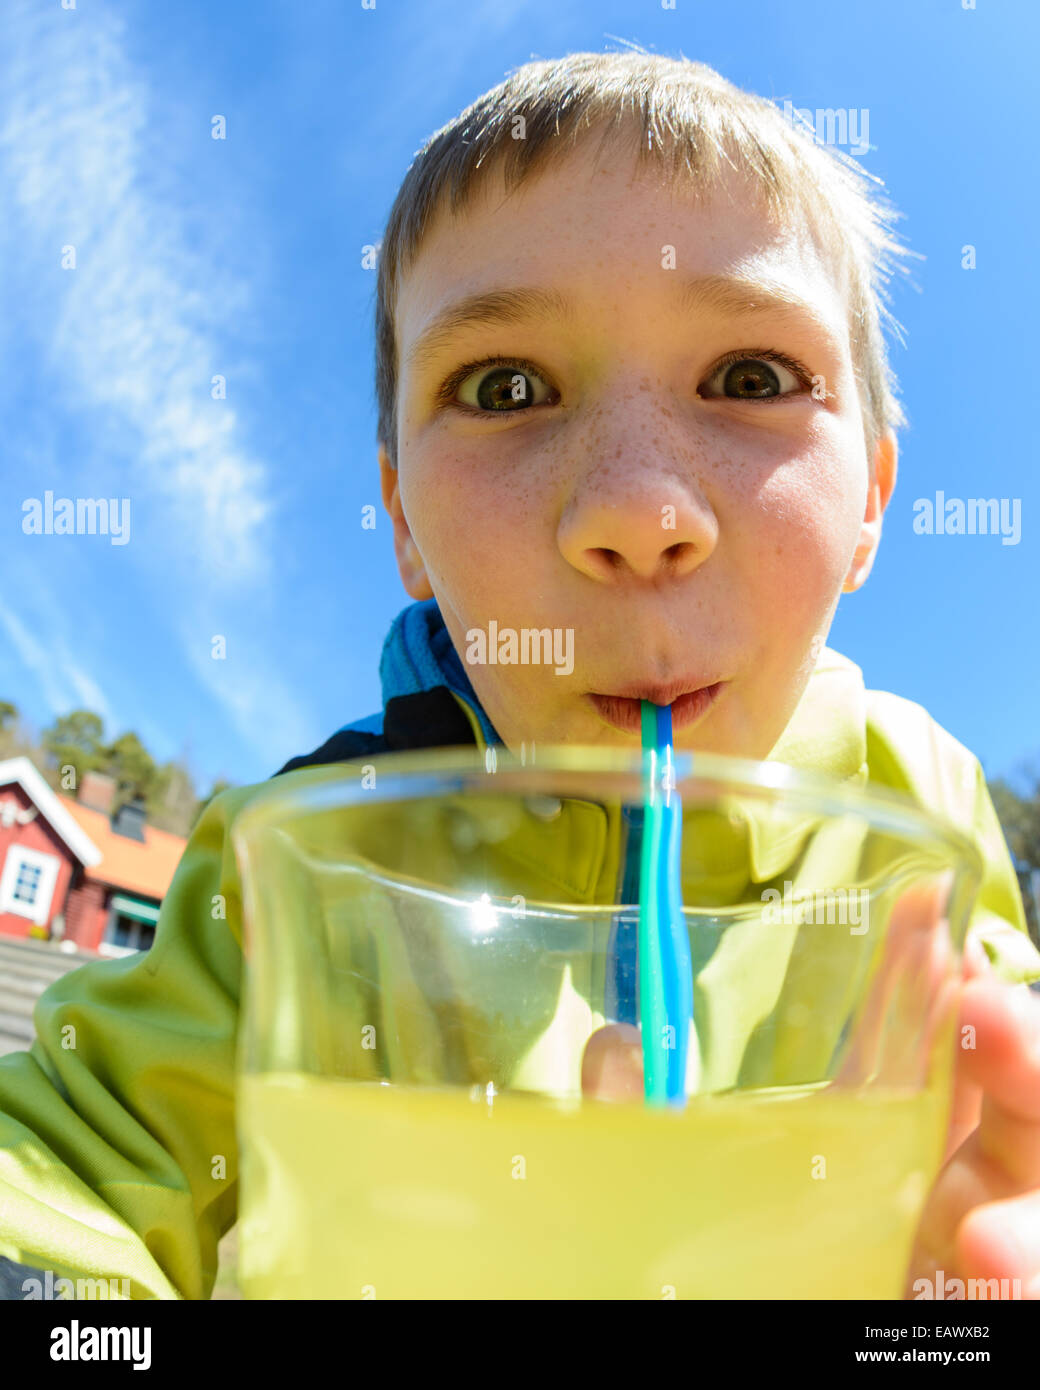 Young boy with wide eyes drinks juice with a straw Stock Photo